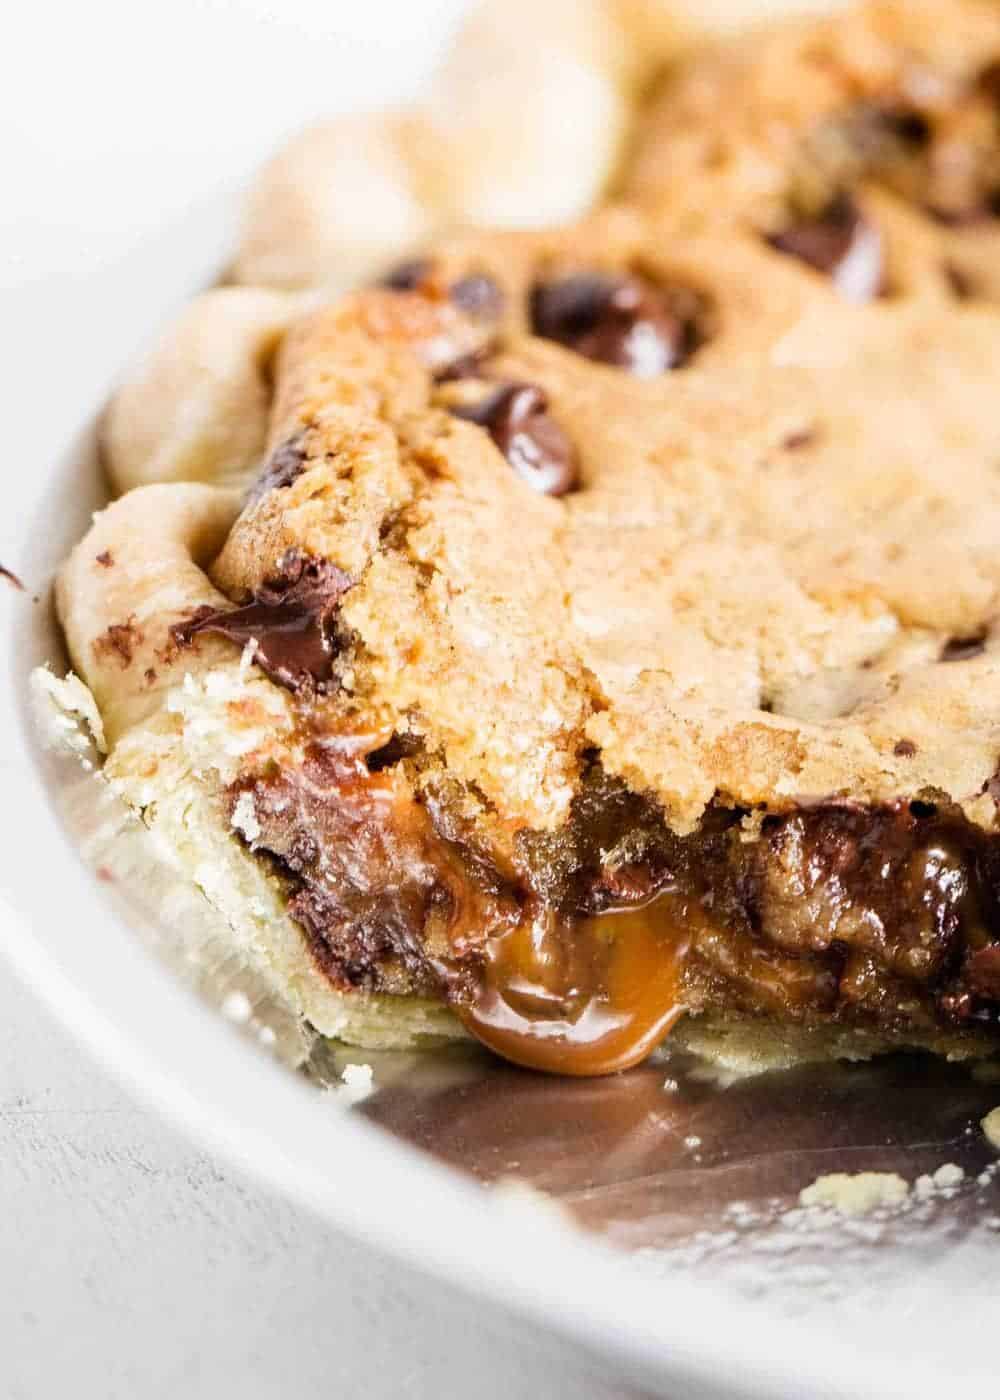 A close up of chocolate chip cookie pie with caramel oozing out.